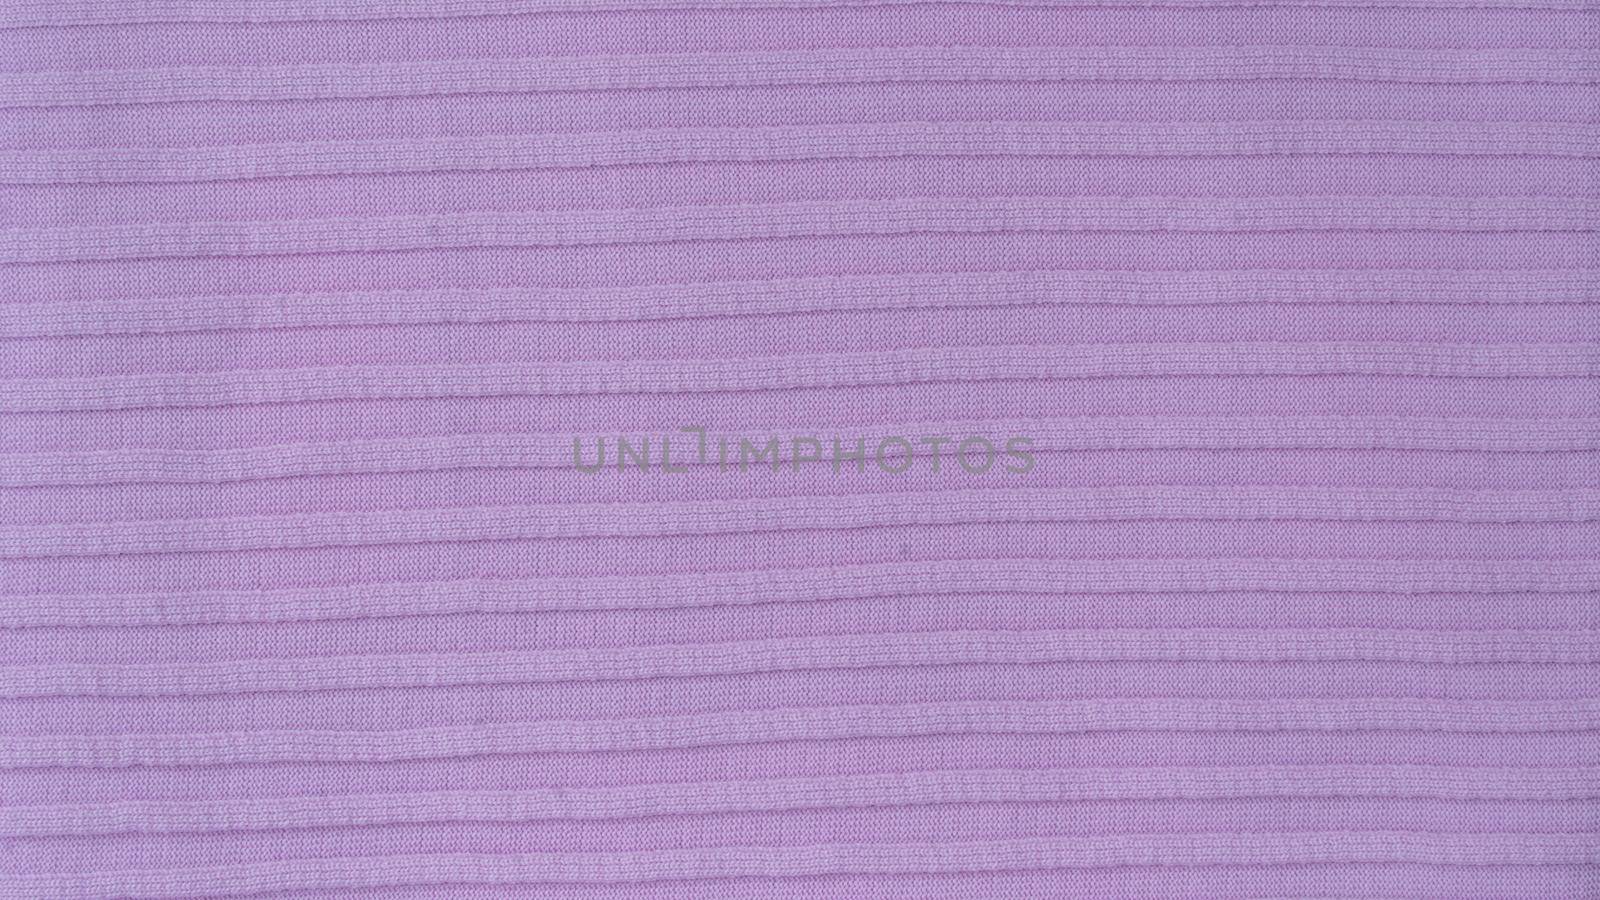 Cotton synthetic fabric is a voluminous horizontal strip of lilac color. High quality photo